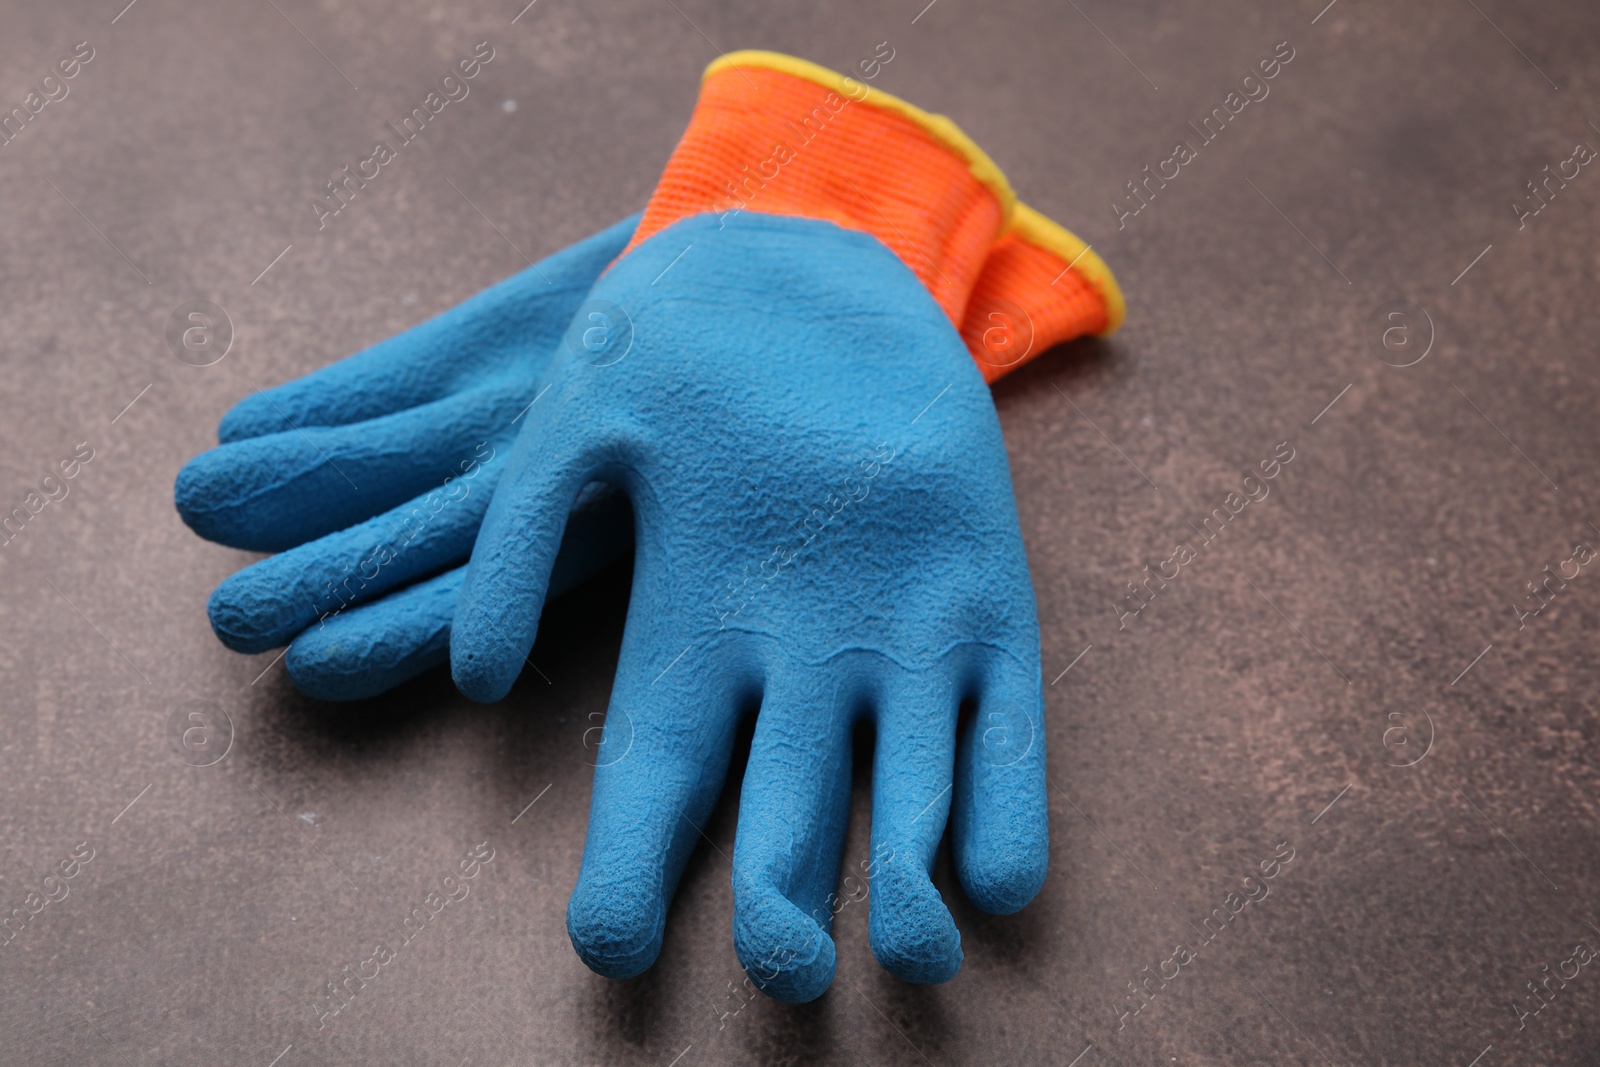 Photo of Pair of color gardening gloves on brown textured table